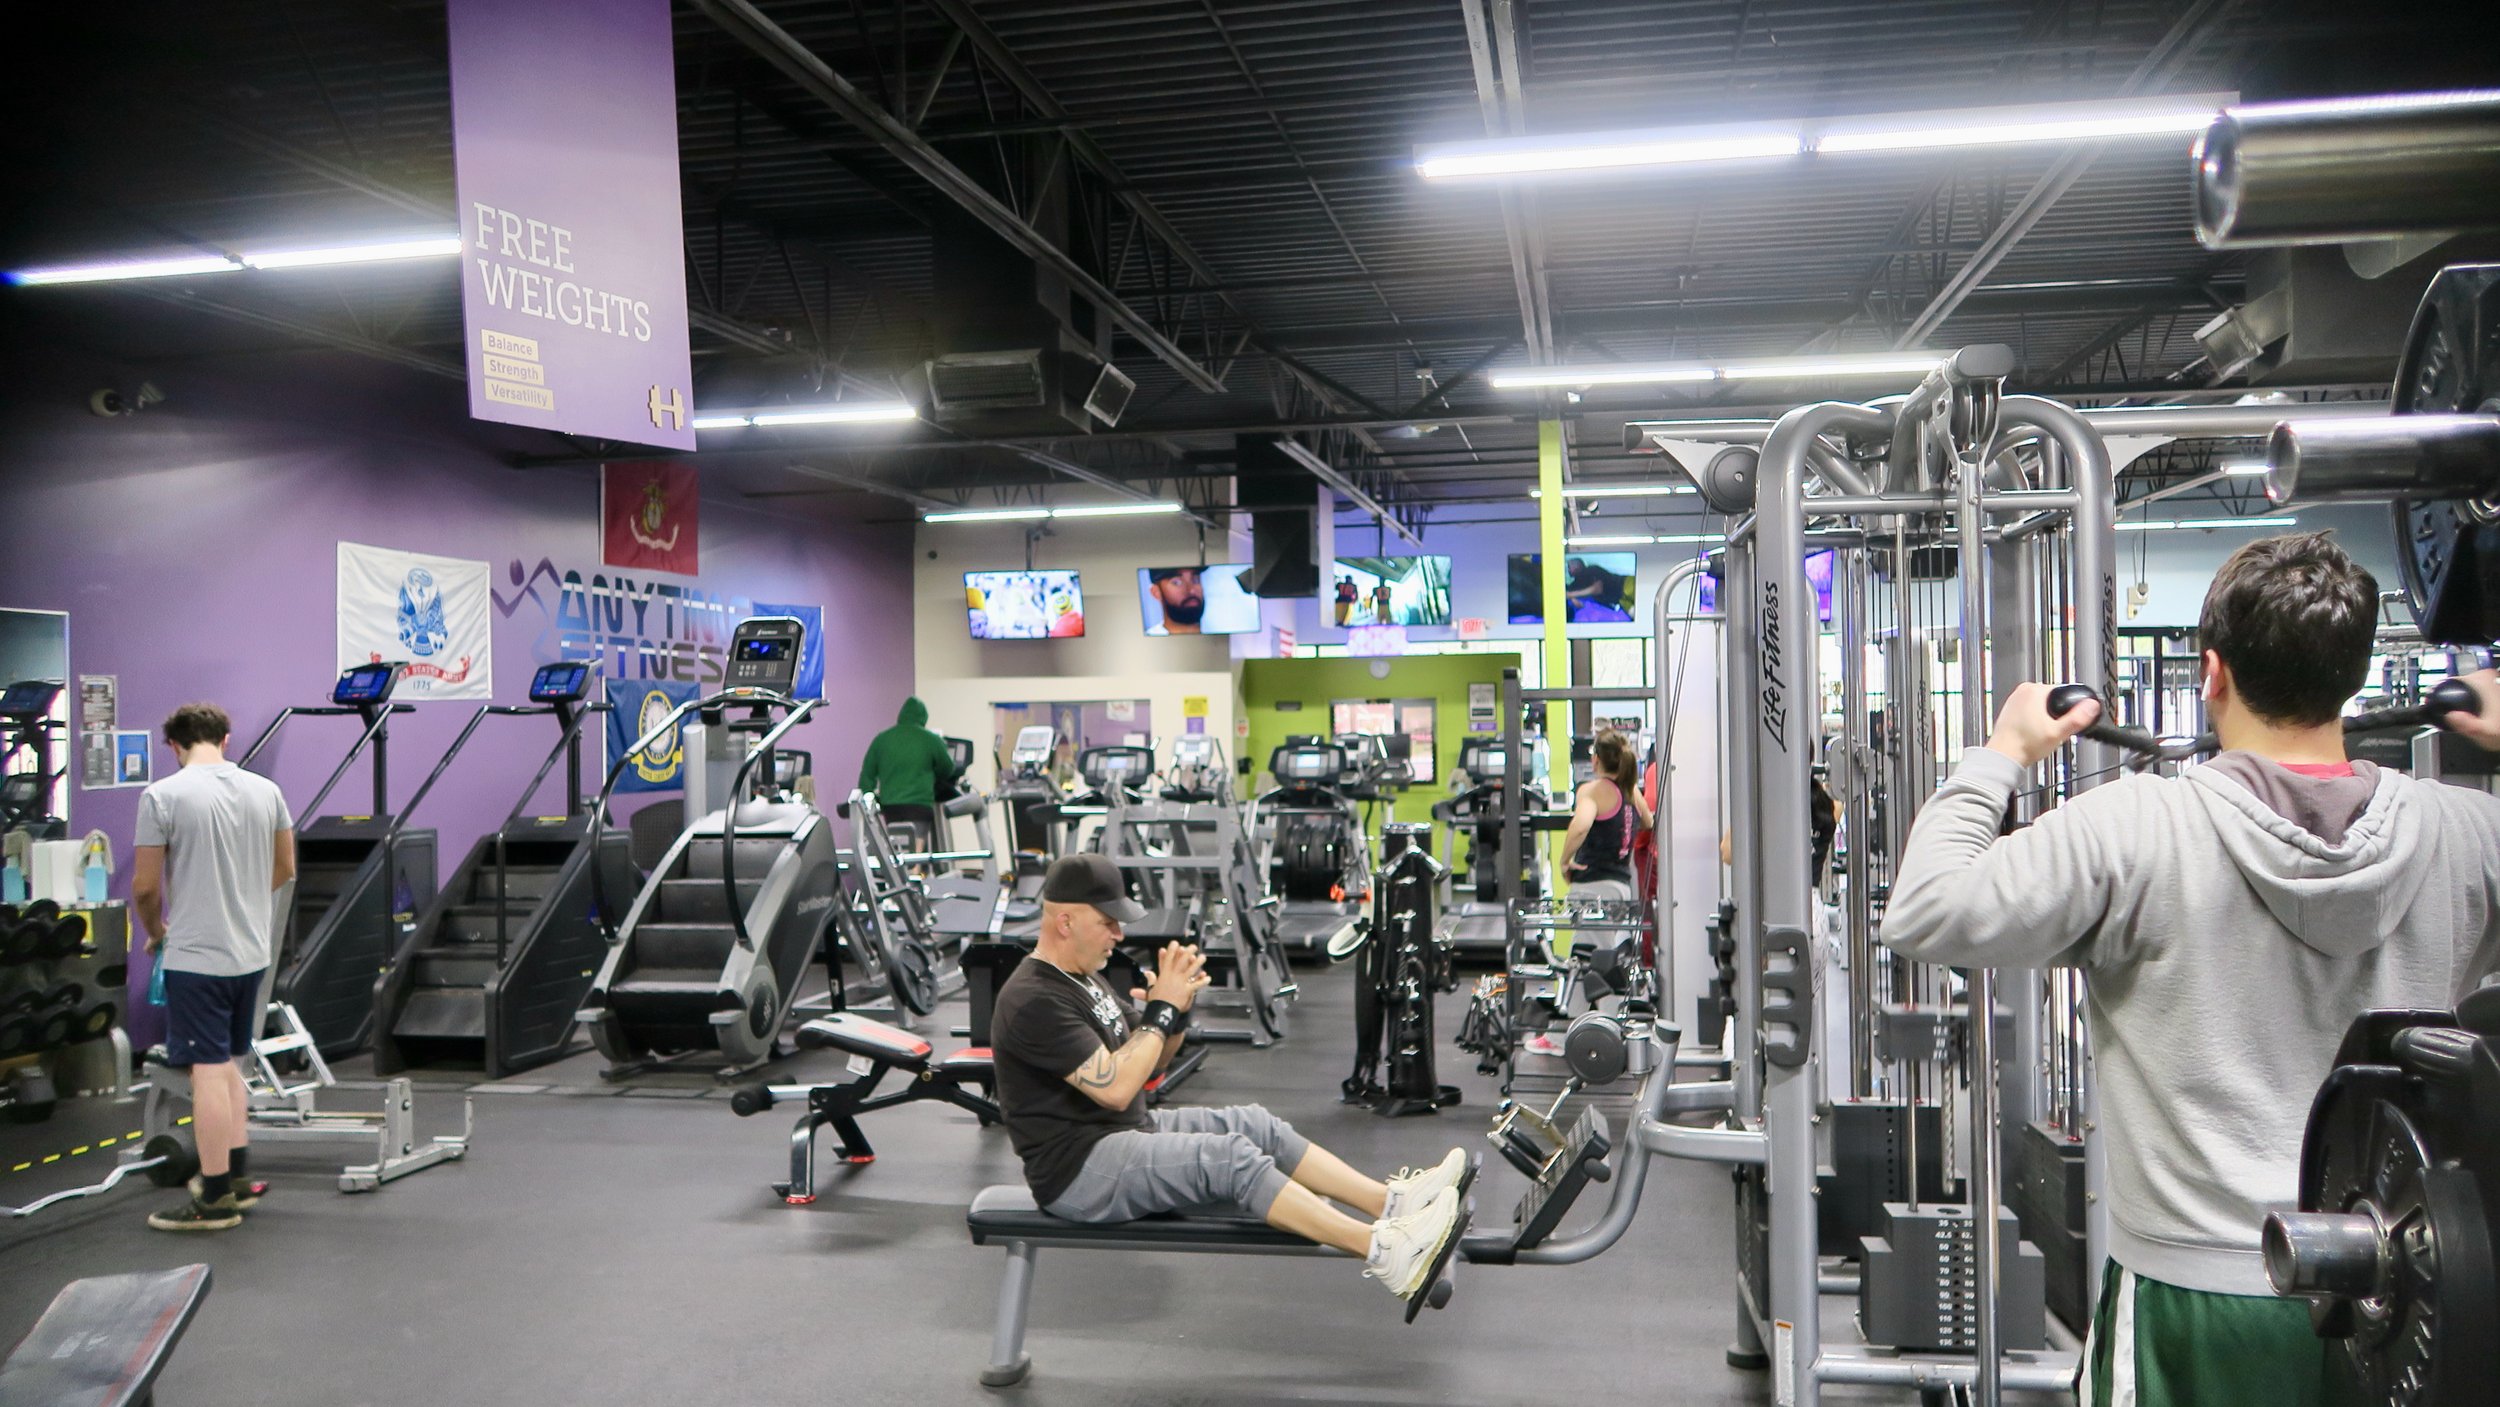 Anytime Fitness Plainfield, IL - 135th & 59